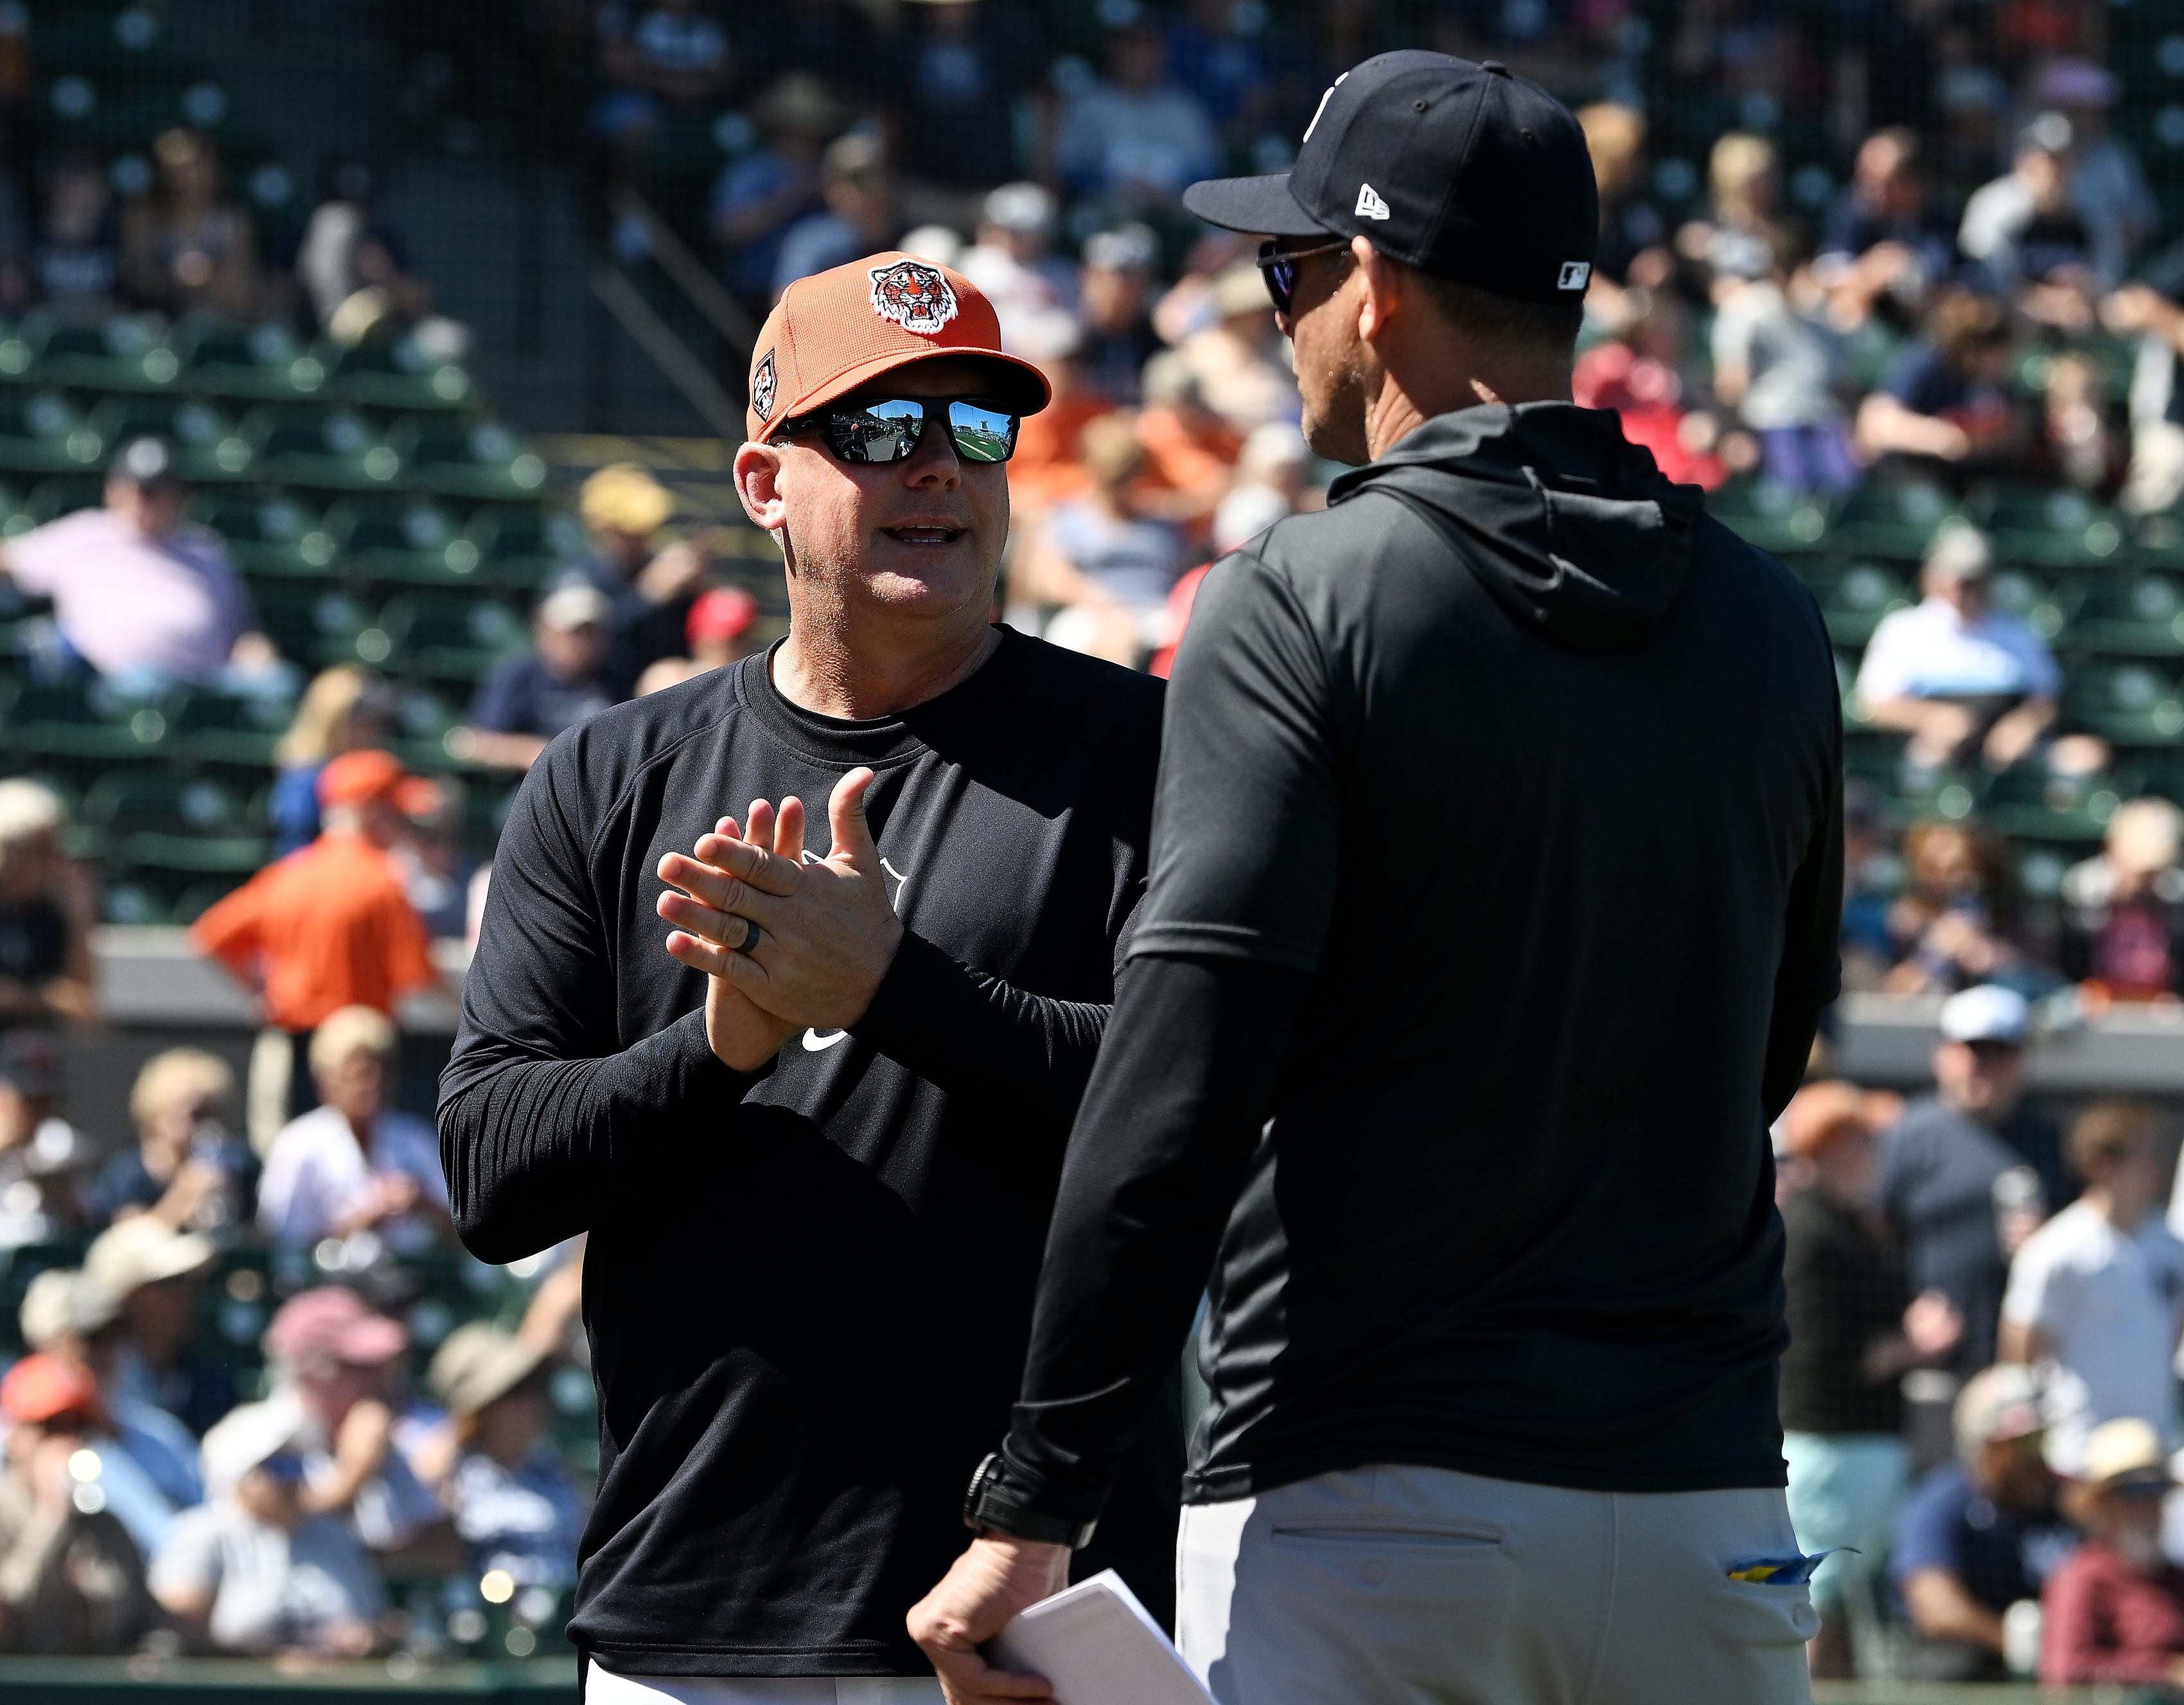 MANAGER: 
AJ Hinch (Fourth season with Tigers, 221-265).

He underplayed it, of course, but one of the biggest moves of the offseason was Hinch signing a long-term extension to remain at the helm. He is completely woven into the fabric of what’s been built here, from player development to the hiring of staff and support personnel, to the way the roster has been built. It’s been done out of necessity for now, but the Tigers are built as a collective and its strength is literally the sum of its parts. 

There are no superstars. There are only maybe four traditional starters. And there are few managers in the game today better adept at maximizing players’ best attributes and putting them in the most favorable situations in-game as possible. And, because he’s honest and open and in constant communication with his players, the buy-in has been just about universal. A winning culture has been put in place before any real winning has been done on the field. That’s a high testament to Hinch’s leadership.